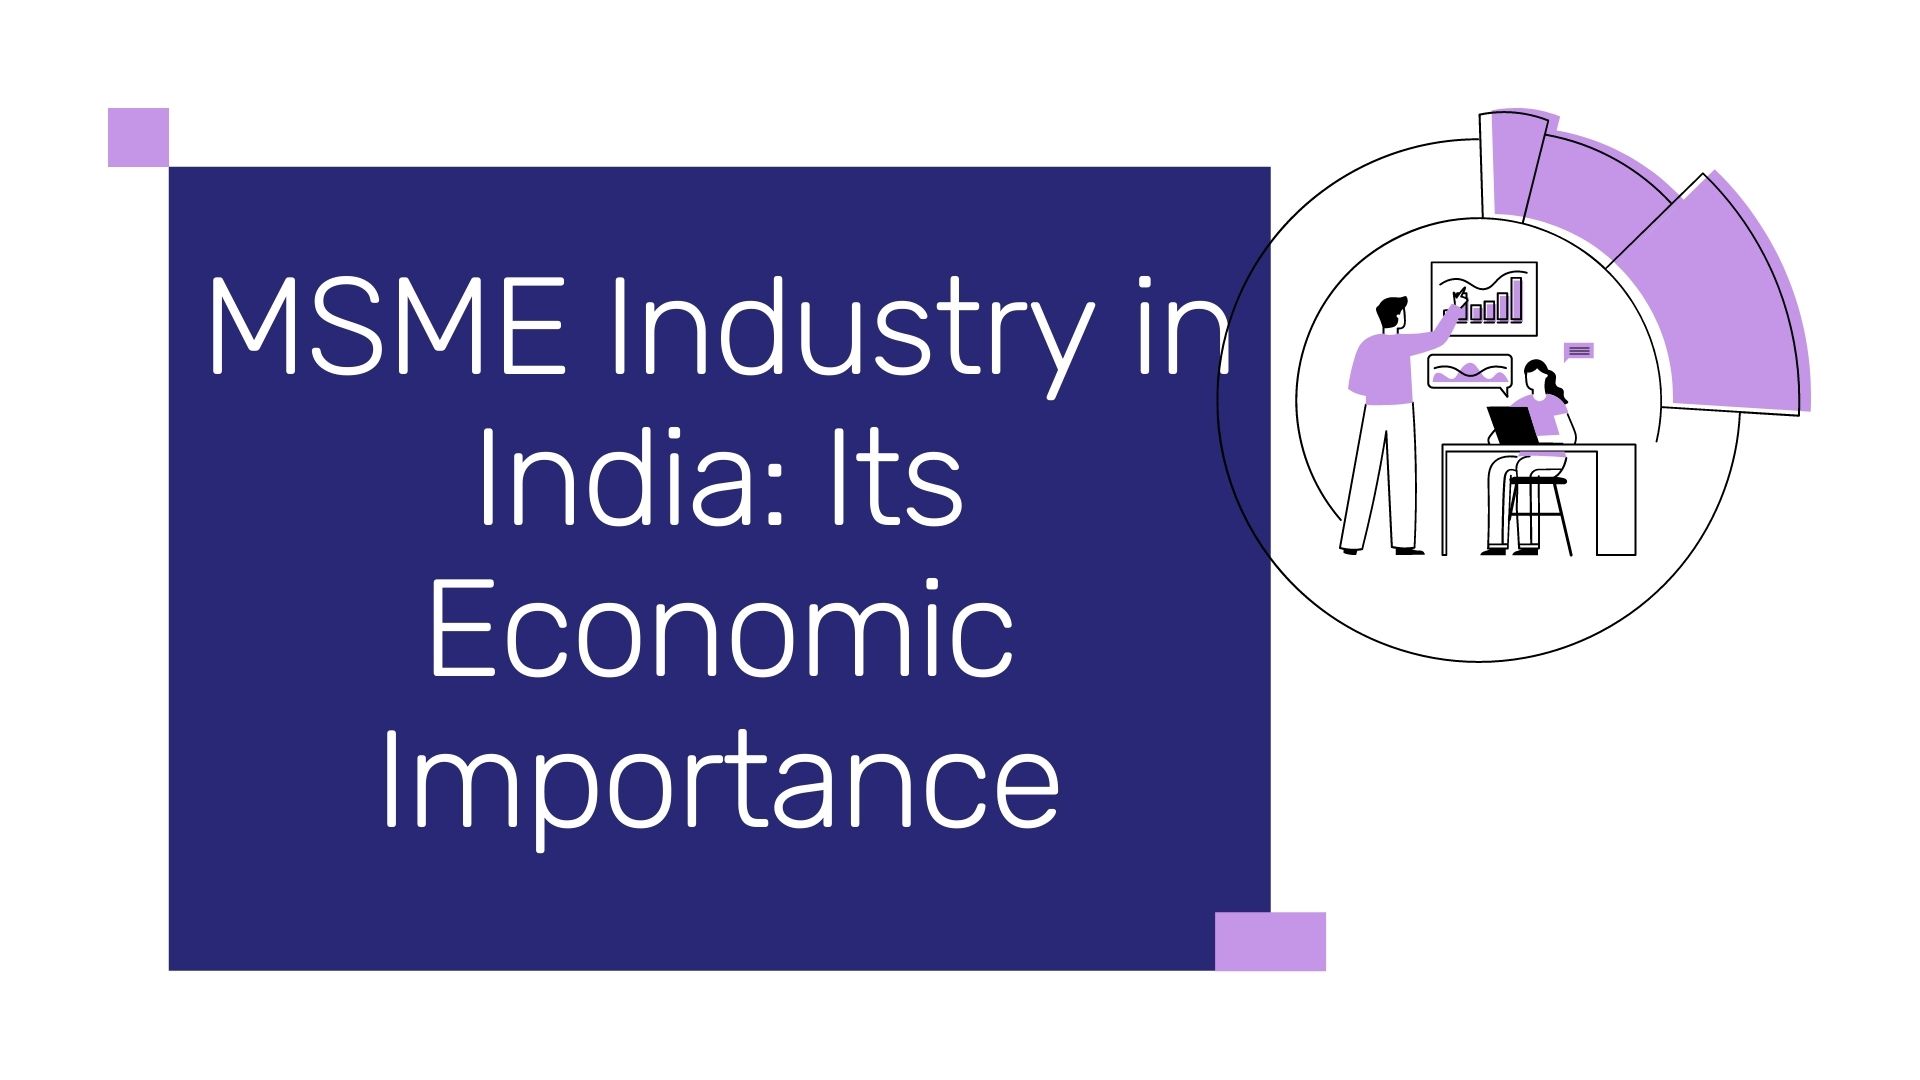 MSME Industry in India Its Economic Importance